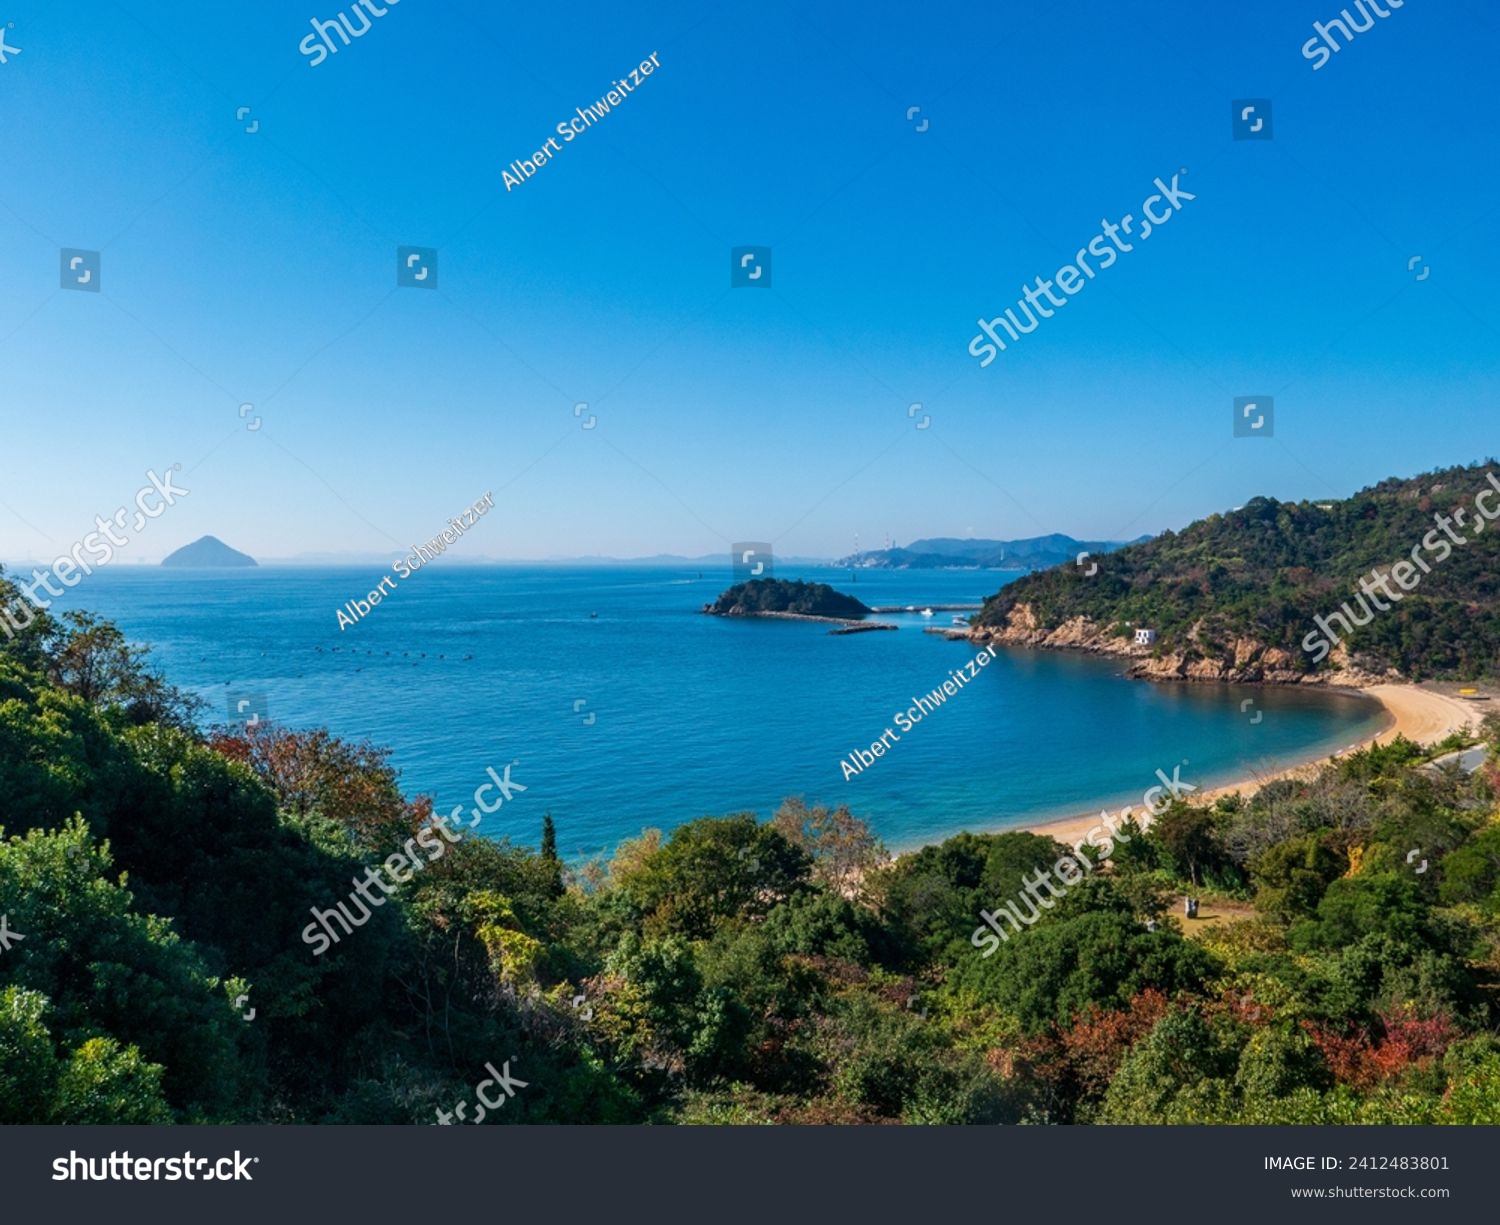 Panoramic view over the coastline with beach of Naoshima Island in the Seto Inland Sea in Japan, known for its museums of contemporary art, architecture and sculpture #2412483801